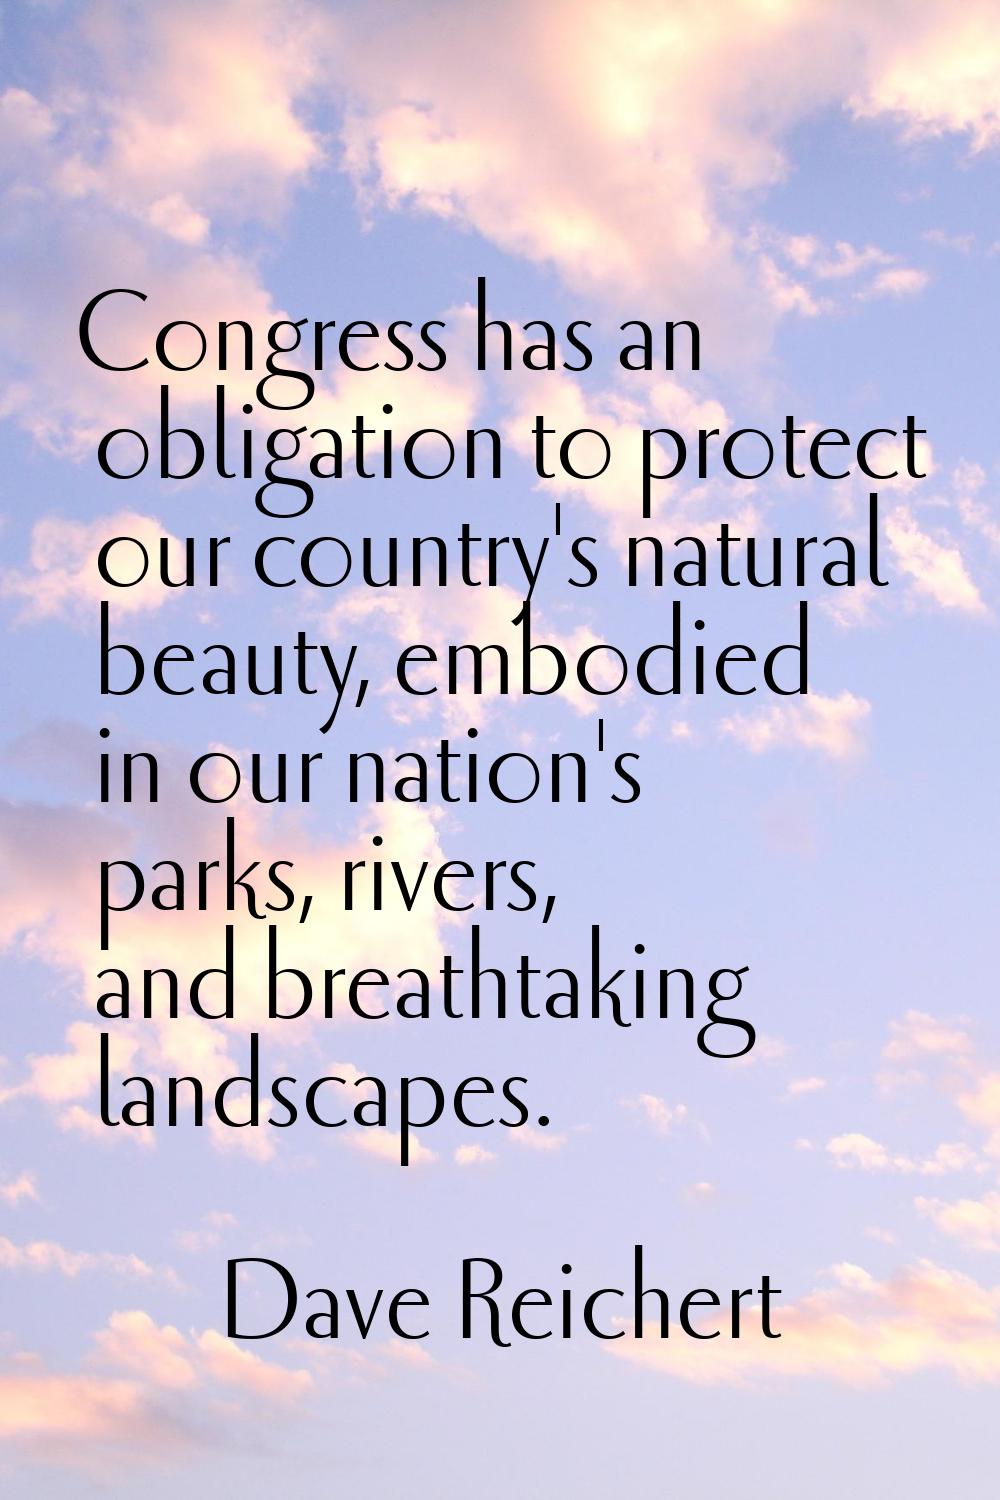 Congress has an obligation to protect our country's natural beauty, embodied in our nation's parks,